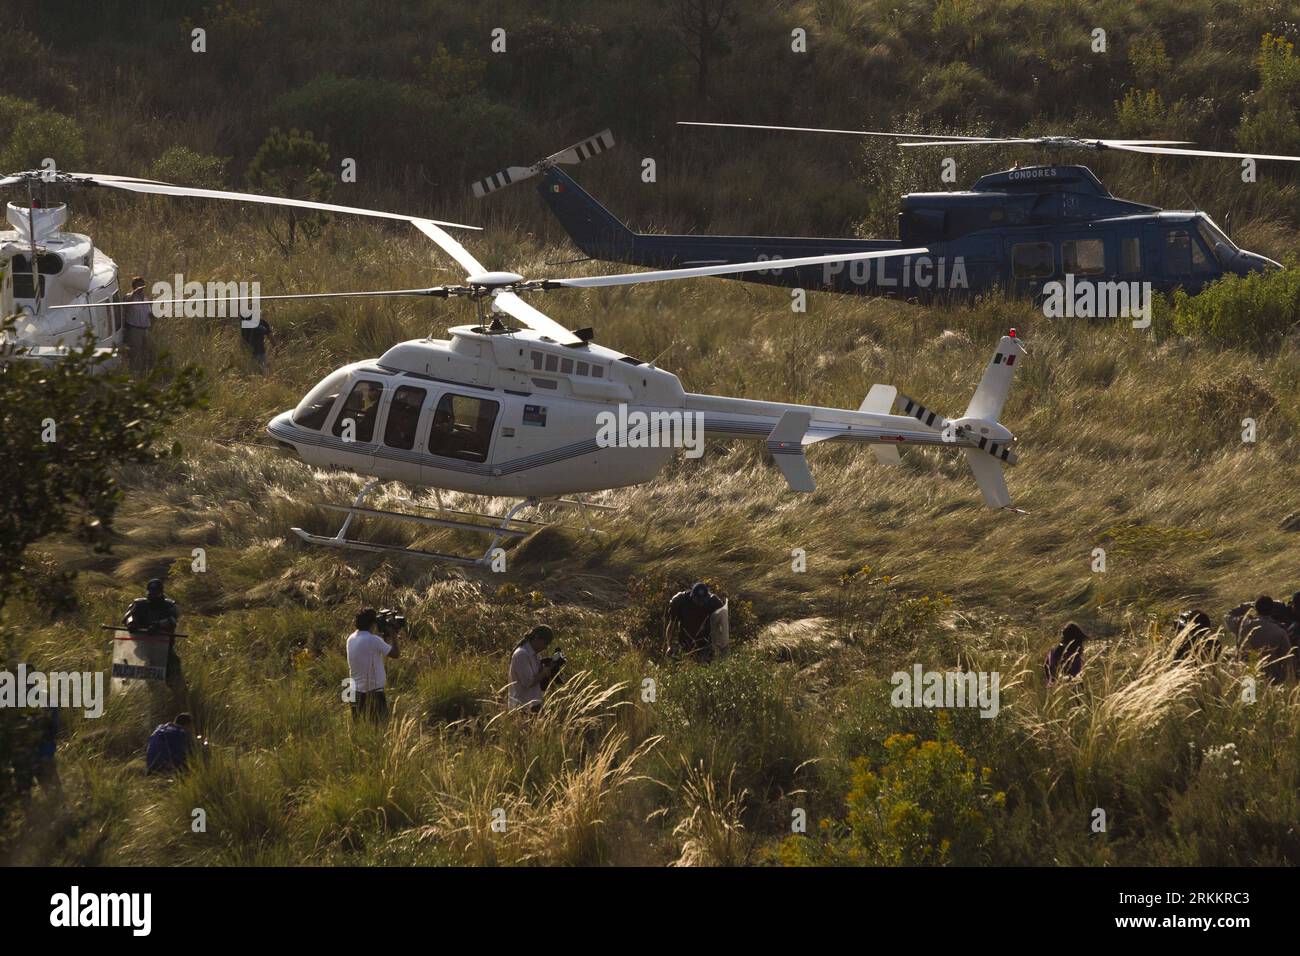 Bildnummer: 56273078  Datum: 11.11.2011  Copyright: imago/Xinhua (111112) -- CHALCO, Nov. 12, 2011 (Xinhua) -- A police helicopter lands at the site where the helicopter carrying Mexican Interior Minister Francisco Blake Mora crashed, in the municipality of Chalco, State of Mexico, Mexico, on Nov. 11, 2011. Mexican Interior Minister Francisco Blake Mora and Vice Interior Minister Felipe Zamora were killed in a helicopter crash on Friday, official sources said. (Xinhua/Claudio Cuz)(zf) MEXICO-INTERIOR MINISTER-FRANCISCO BLAKE MORA-DEATH PUBLICATIONxNOTxINxCHN People Politik Absturz Hubschrauber Stock Photo